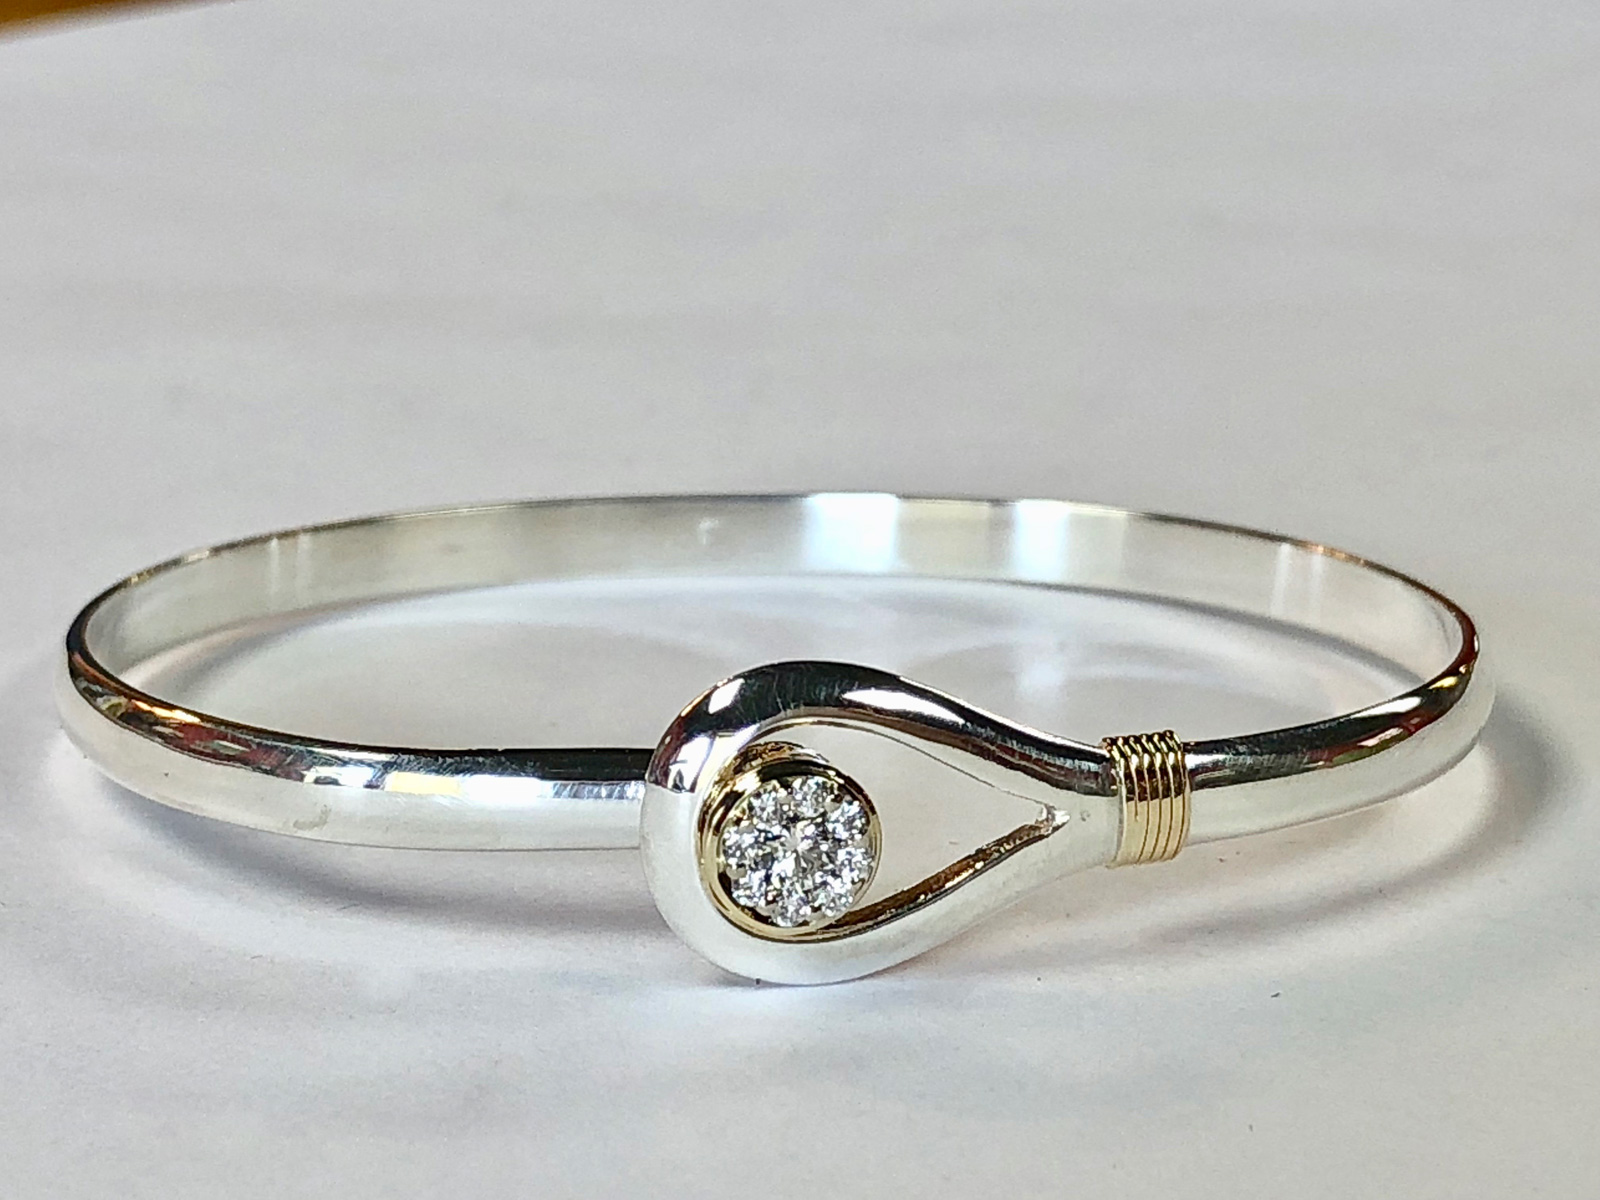 bangle bracelet with diamond cluster and hook clasp